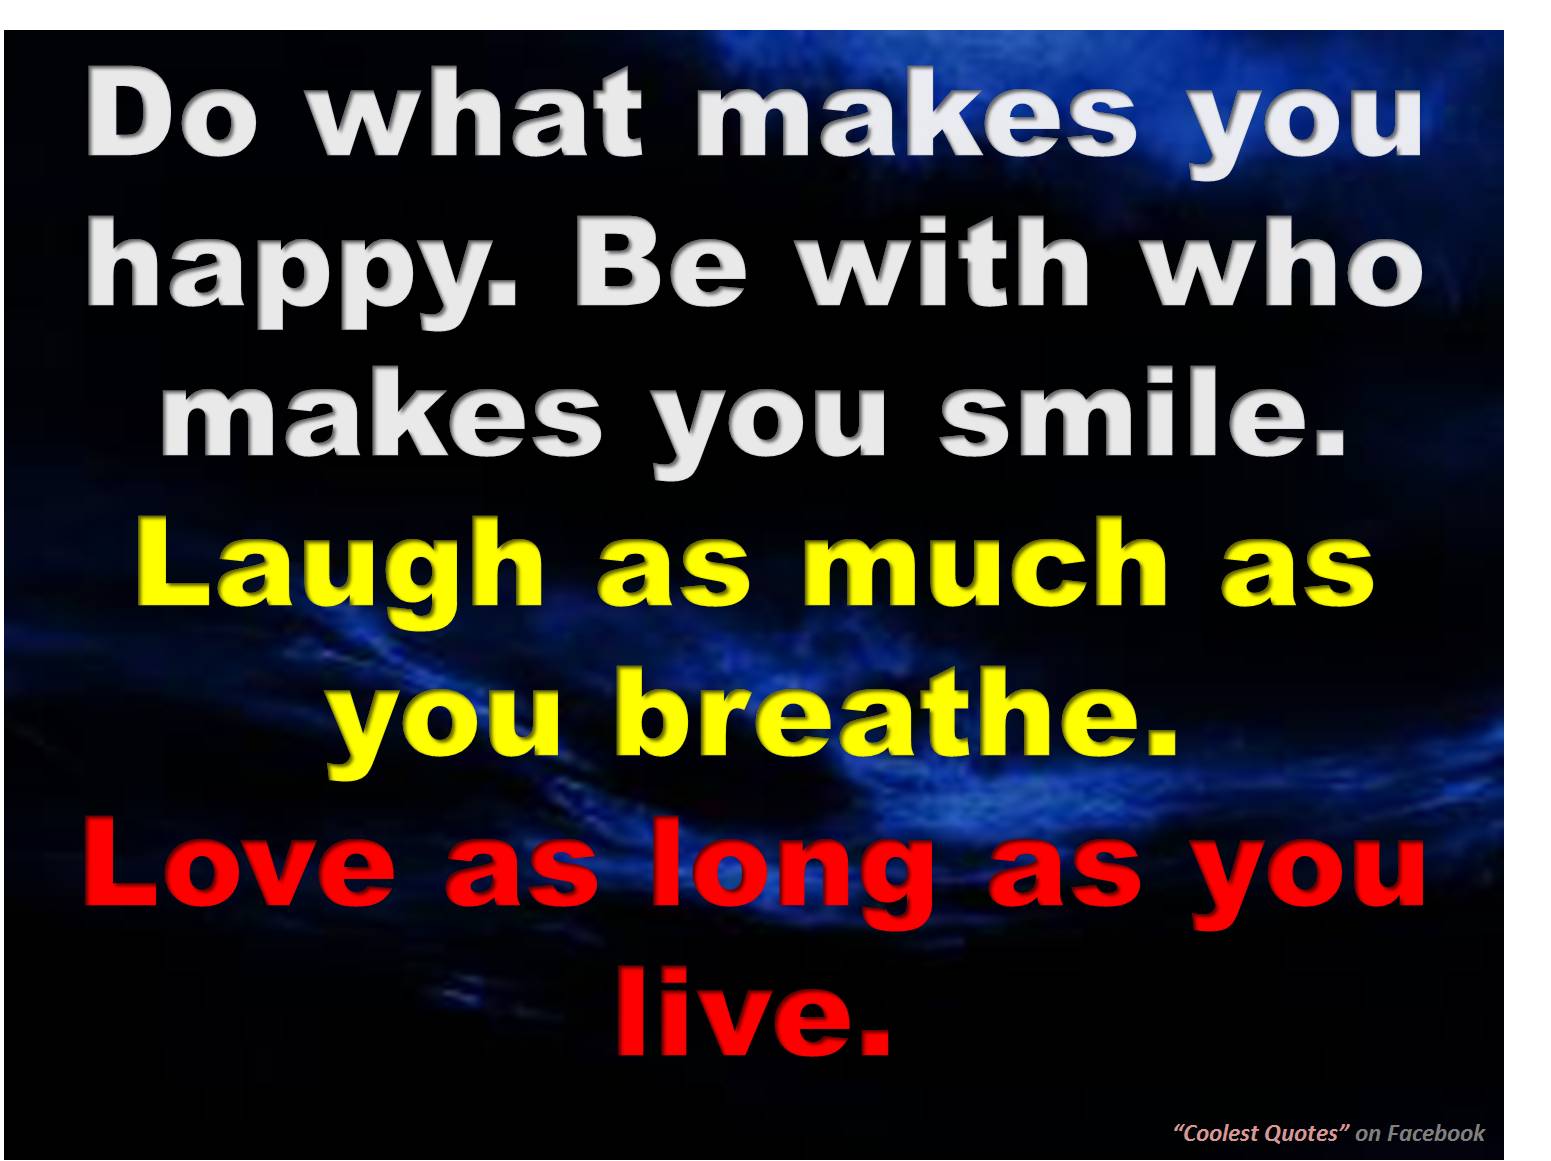 Beautiful Quote for a Life Full of Love and Smiles